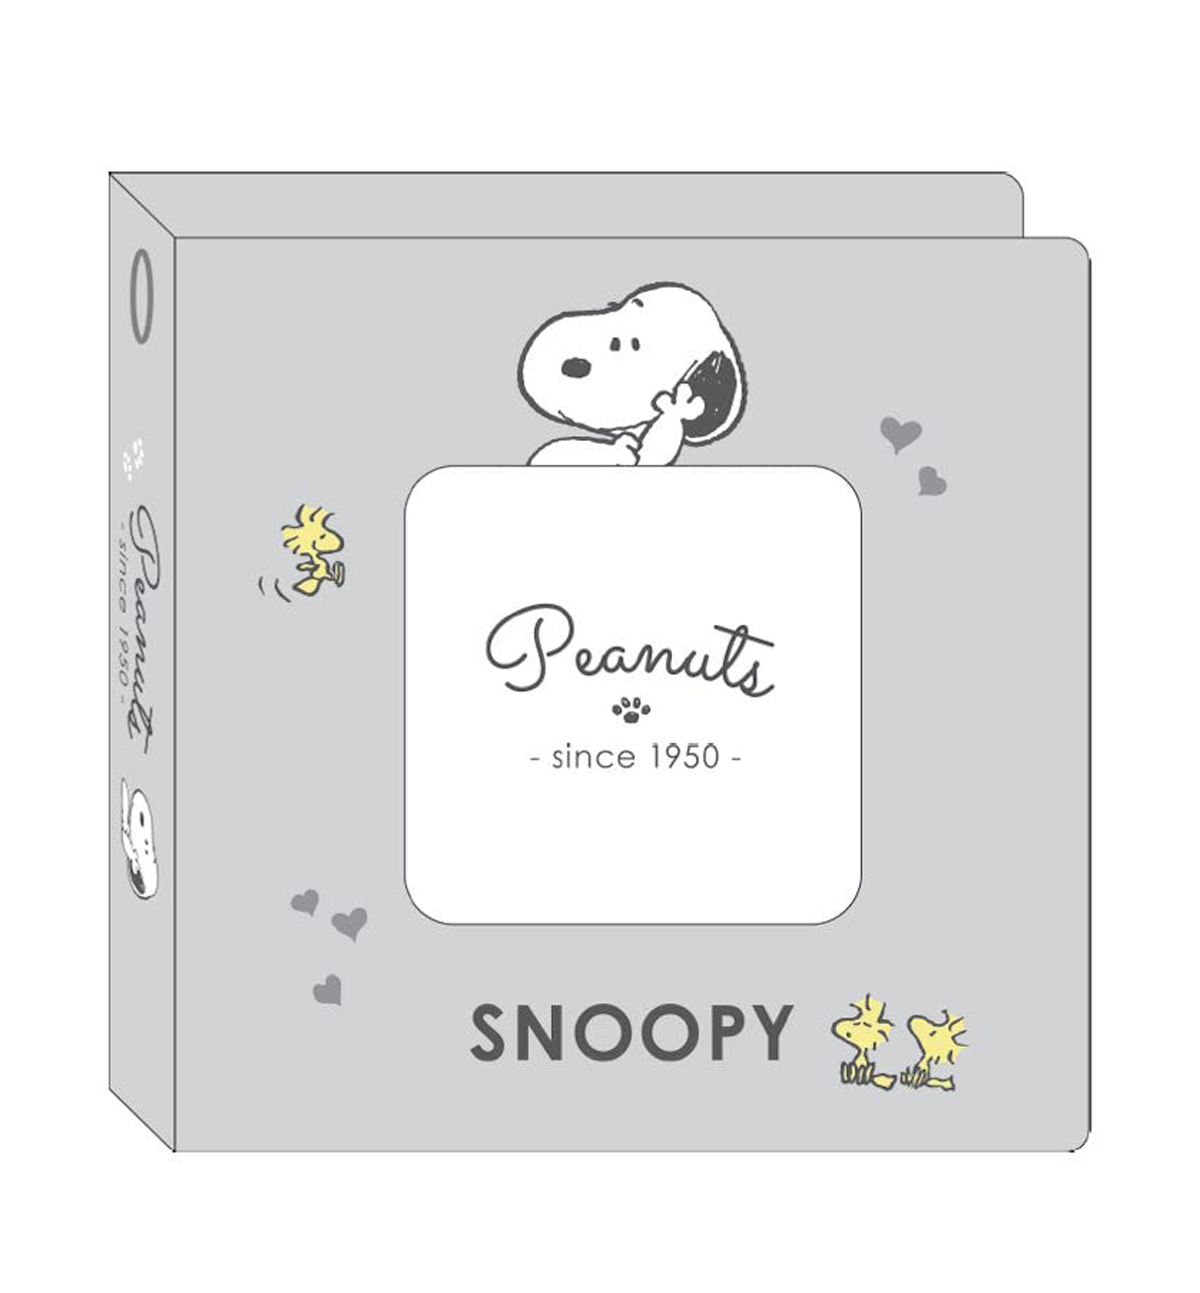 Peanuts Snoopy & Woodstock Photocard Collect Book [Gray]